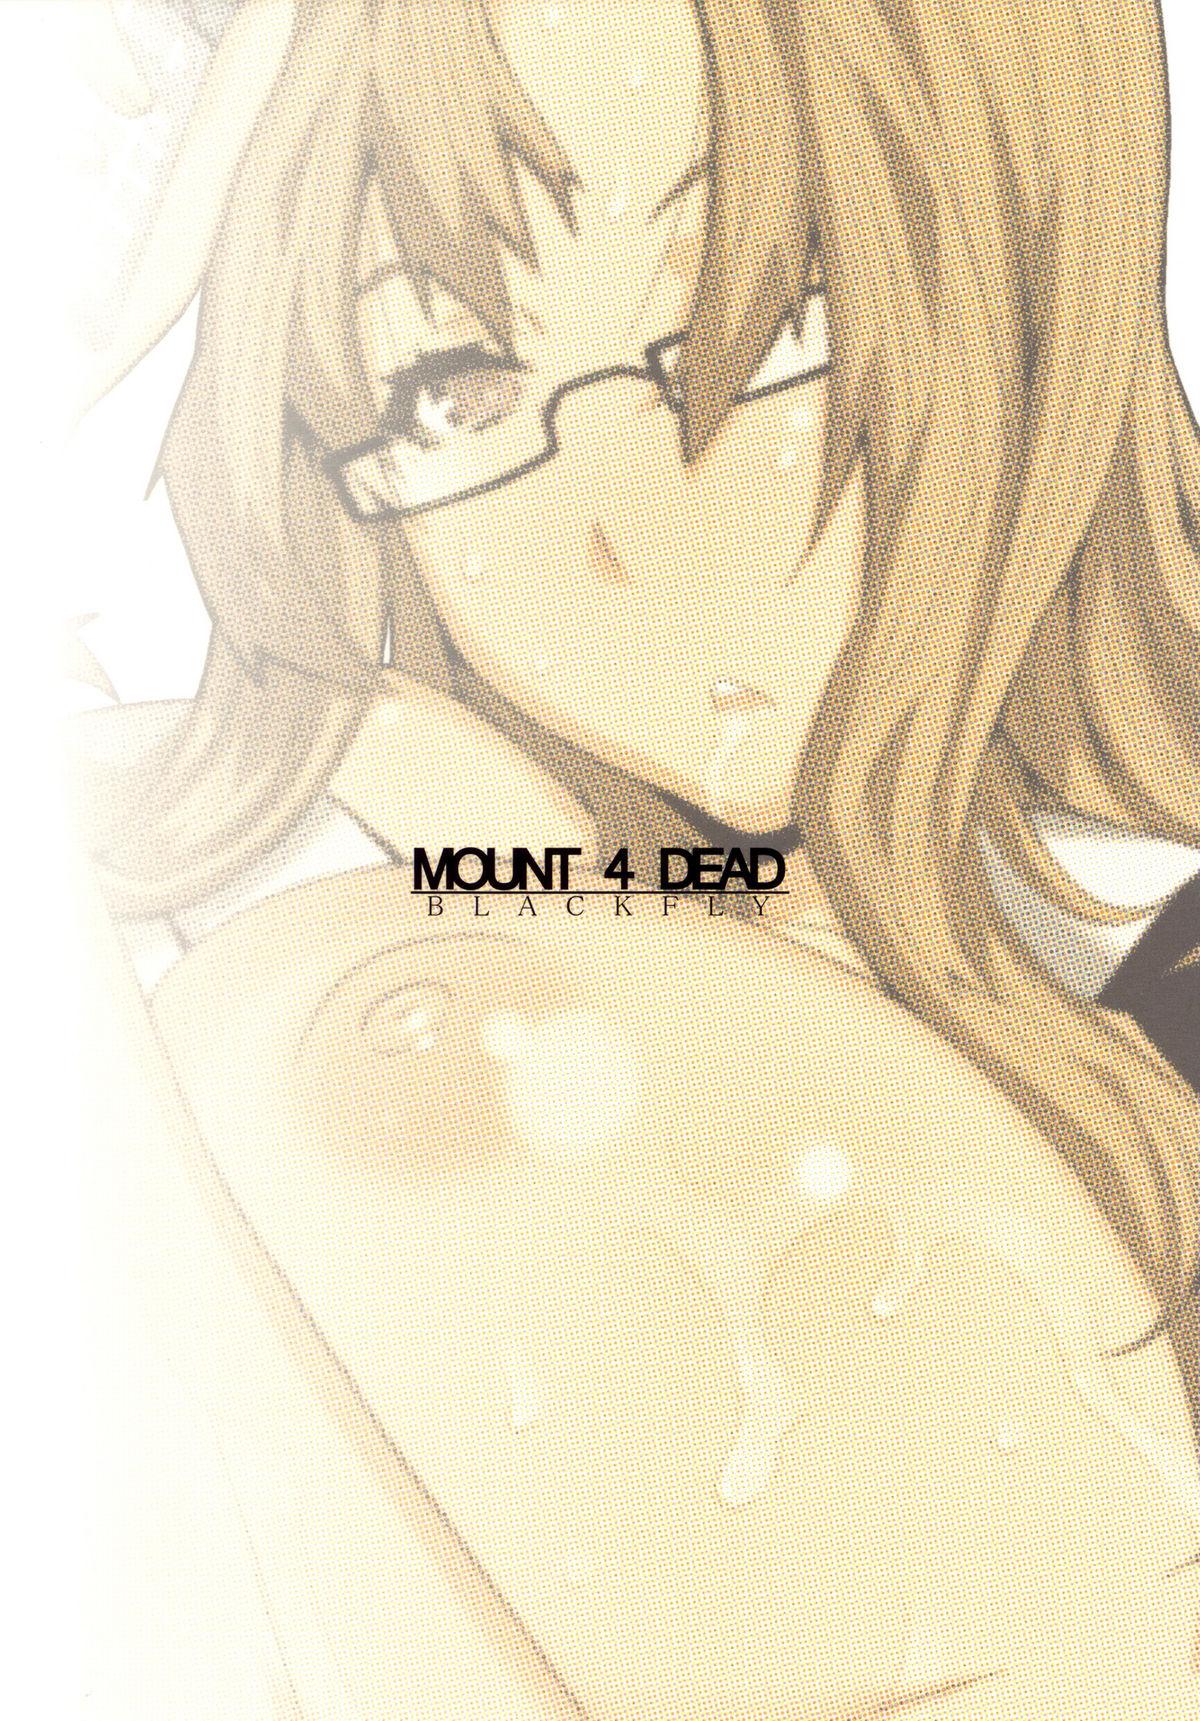 Actress MOUNT 4 DEAD - Steinsgate Boy Girl - Page 27